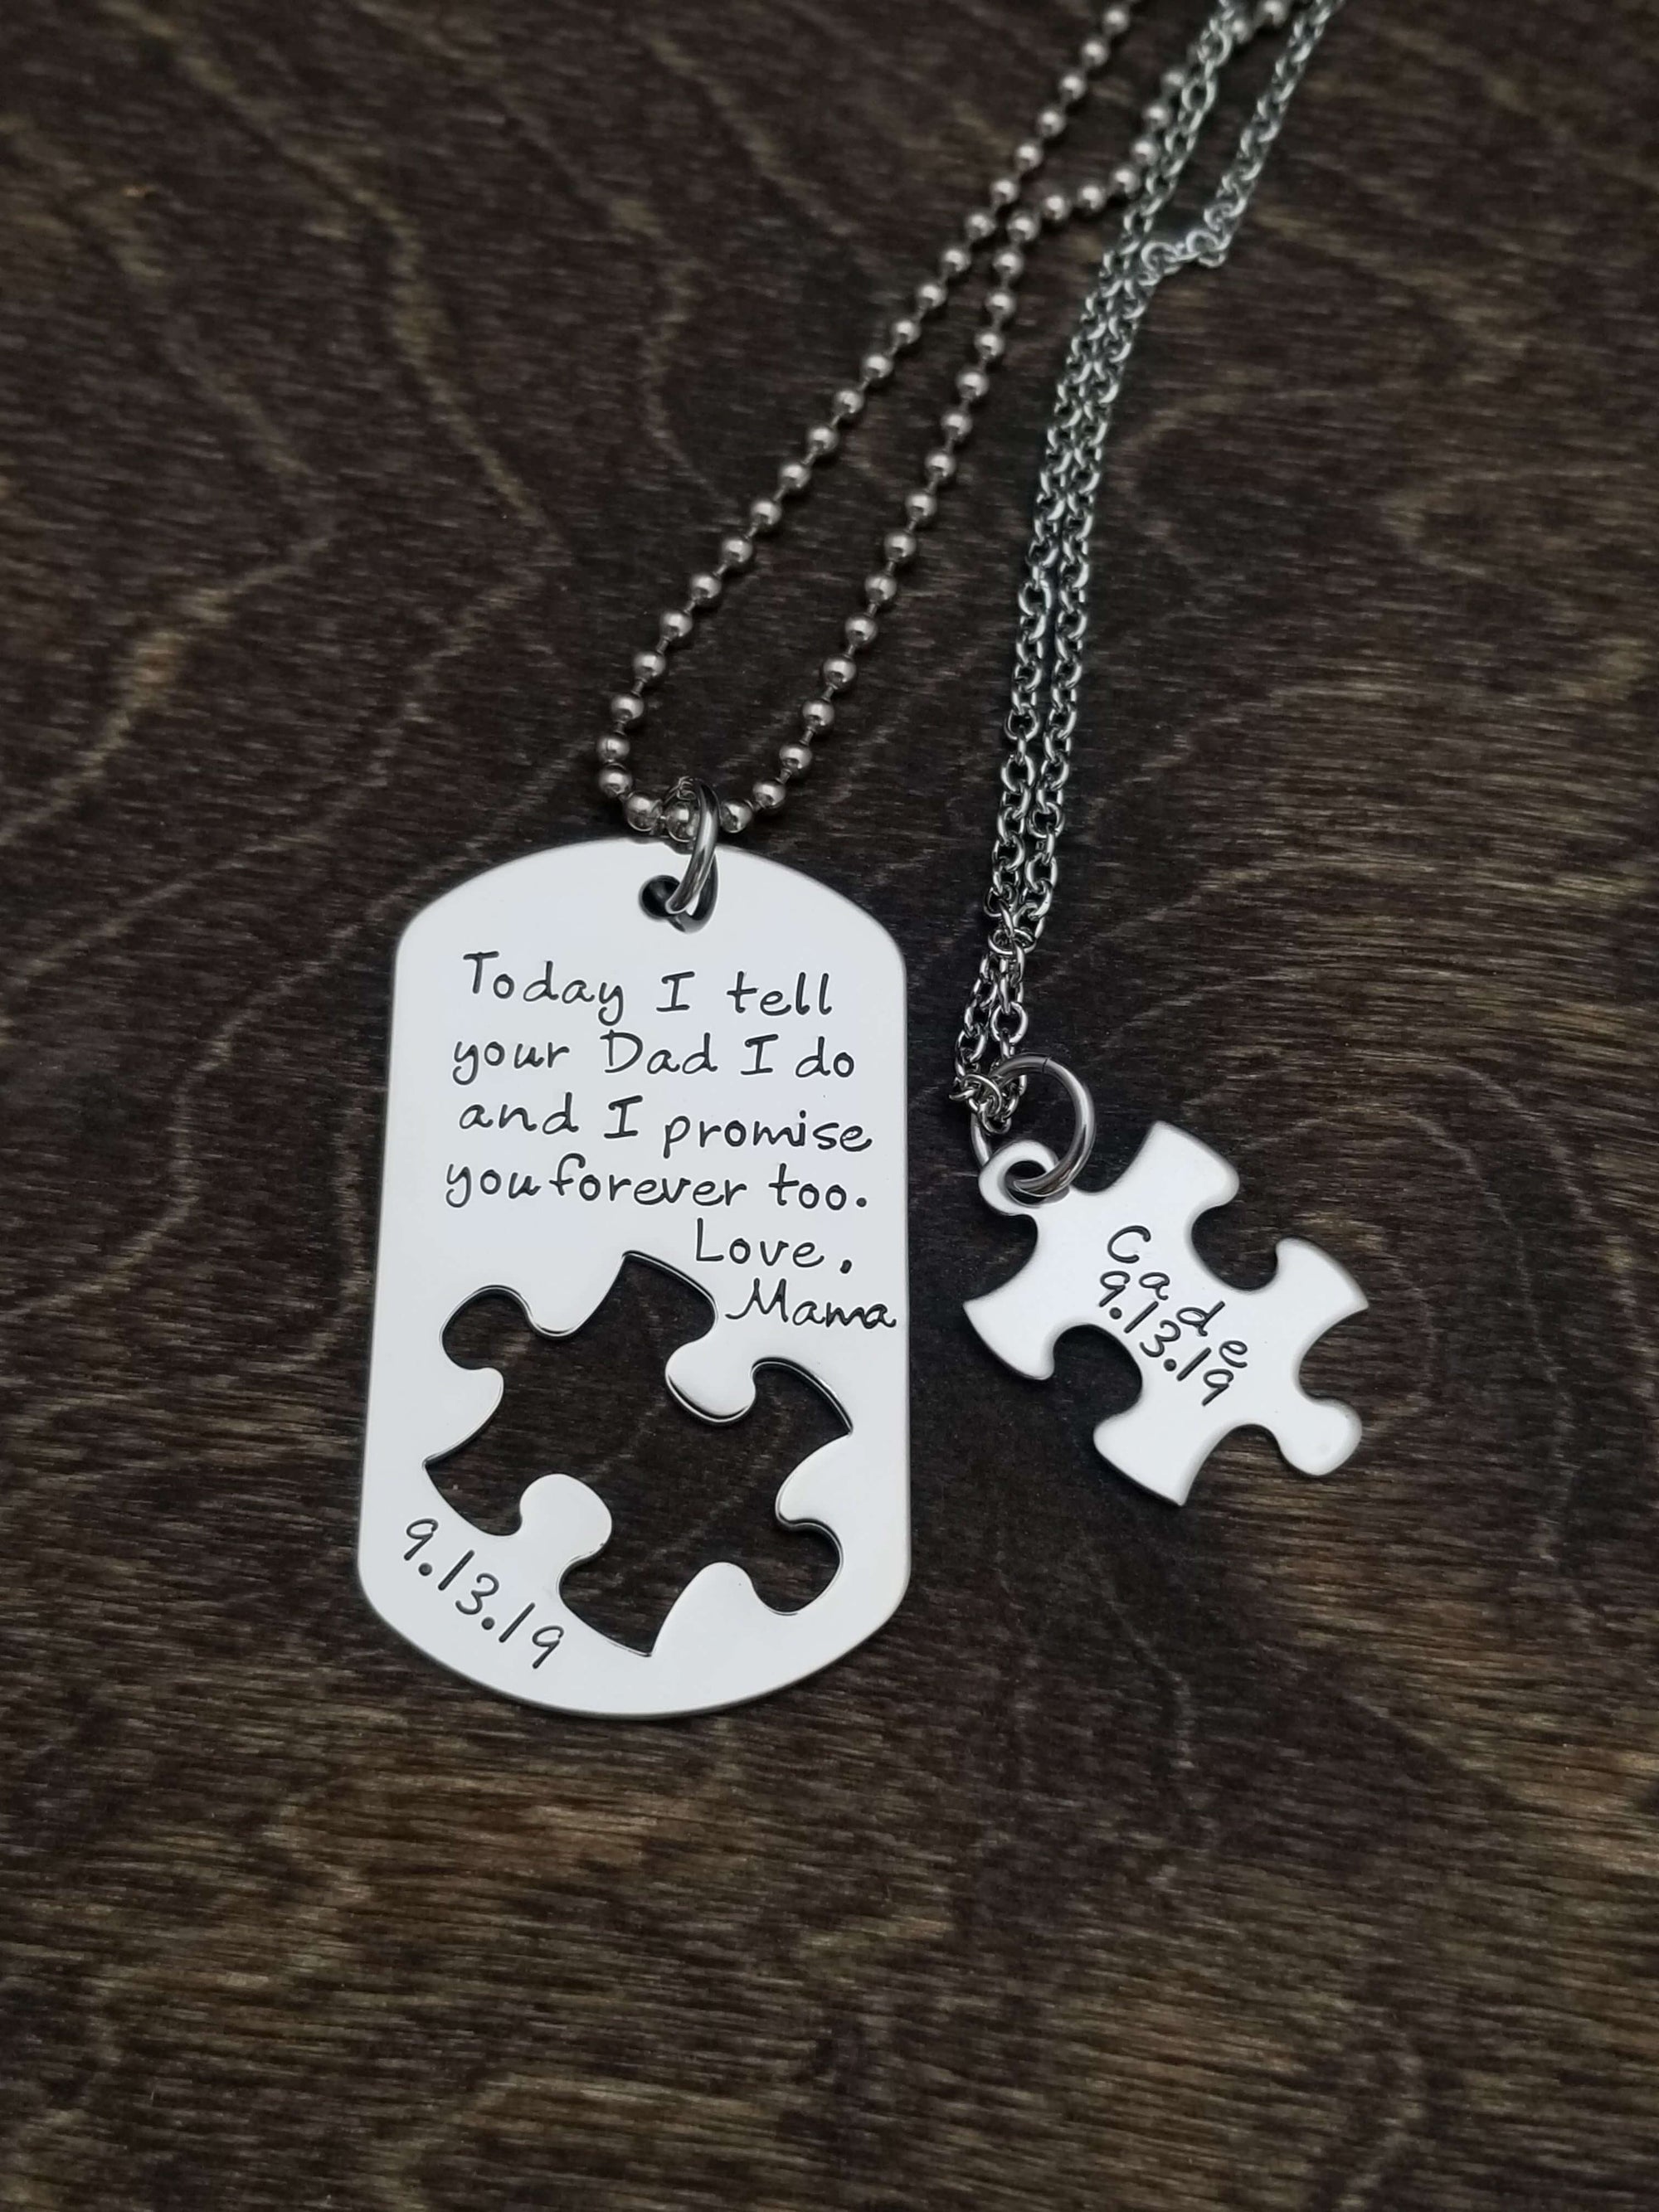 Personalized Gift Wedding, Wedding gift for step children, Step son gift, Step daughter gift,  New Step Mom, Necklaces, HandmadeLoveStories, HandmadeLoveStories , [Handmade_Love_Stories], [Hand_Stamped_Jewelry], [Etsy_Stamped_Jewelry], [Etsy_Jewelry]